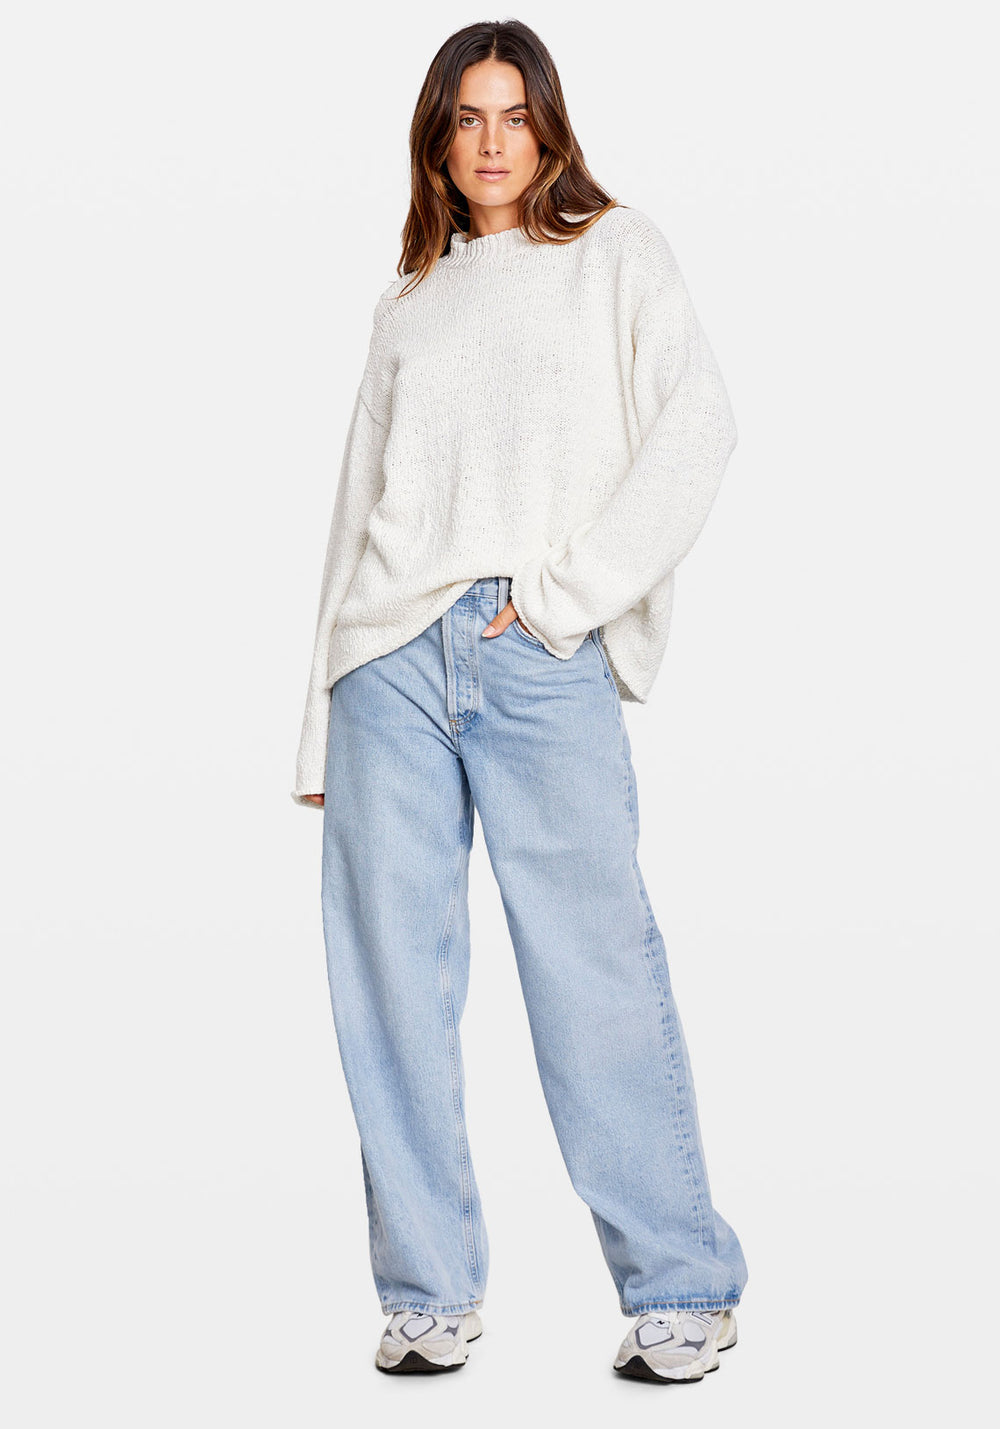 TILLY SWEATER WHITE